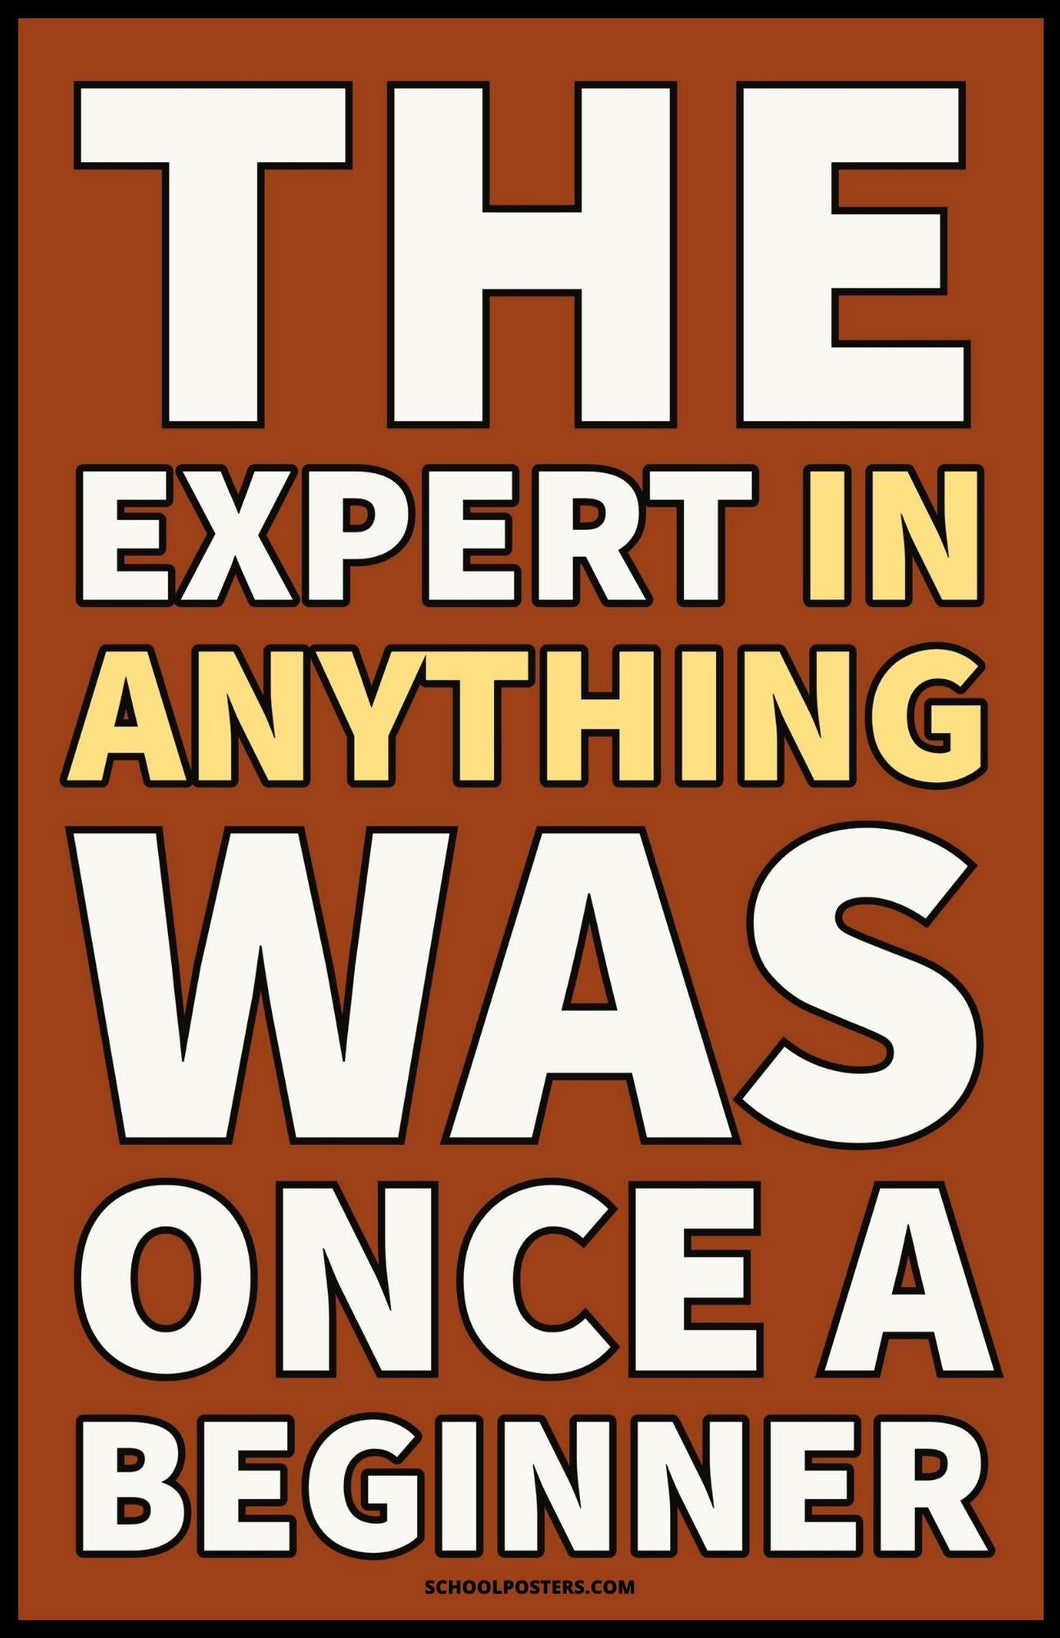 The Expert In Anything Was Once A Beginner Poster